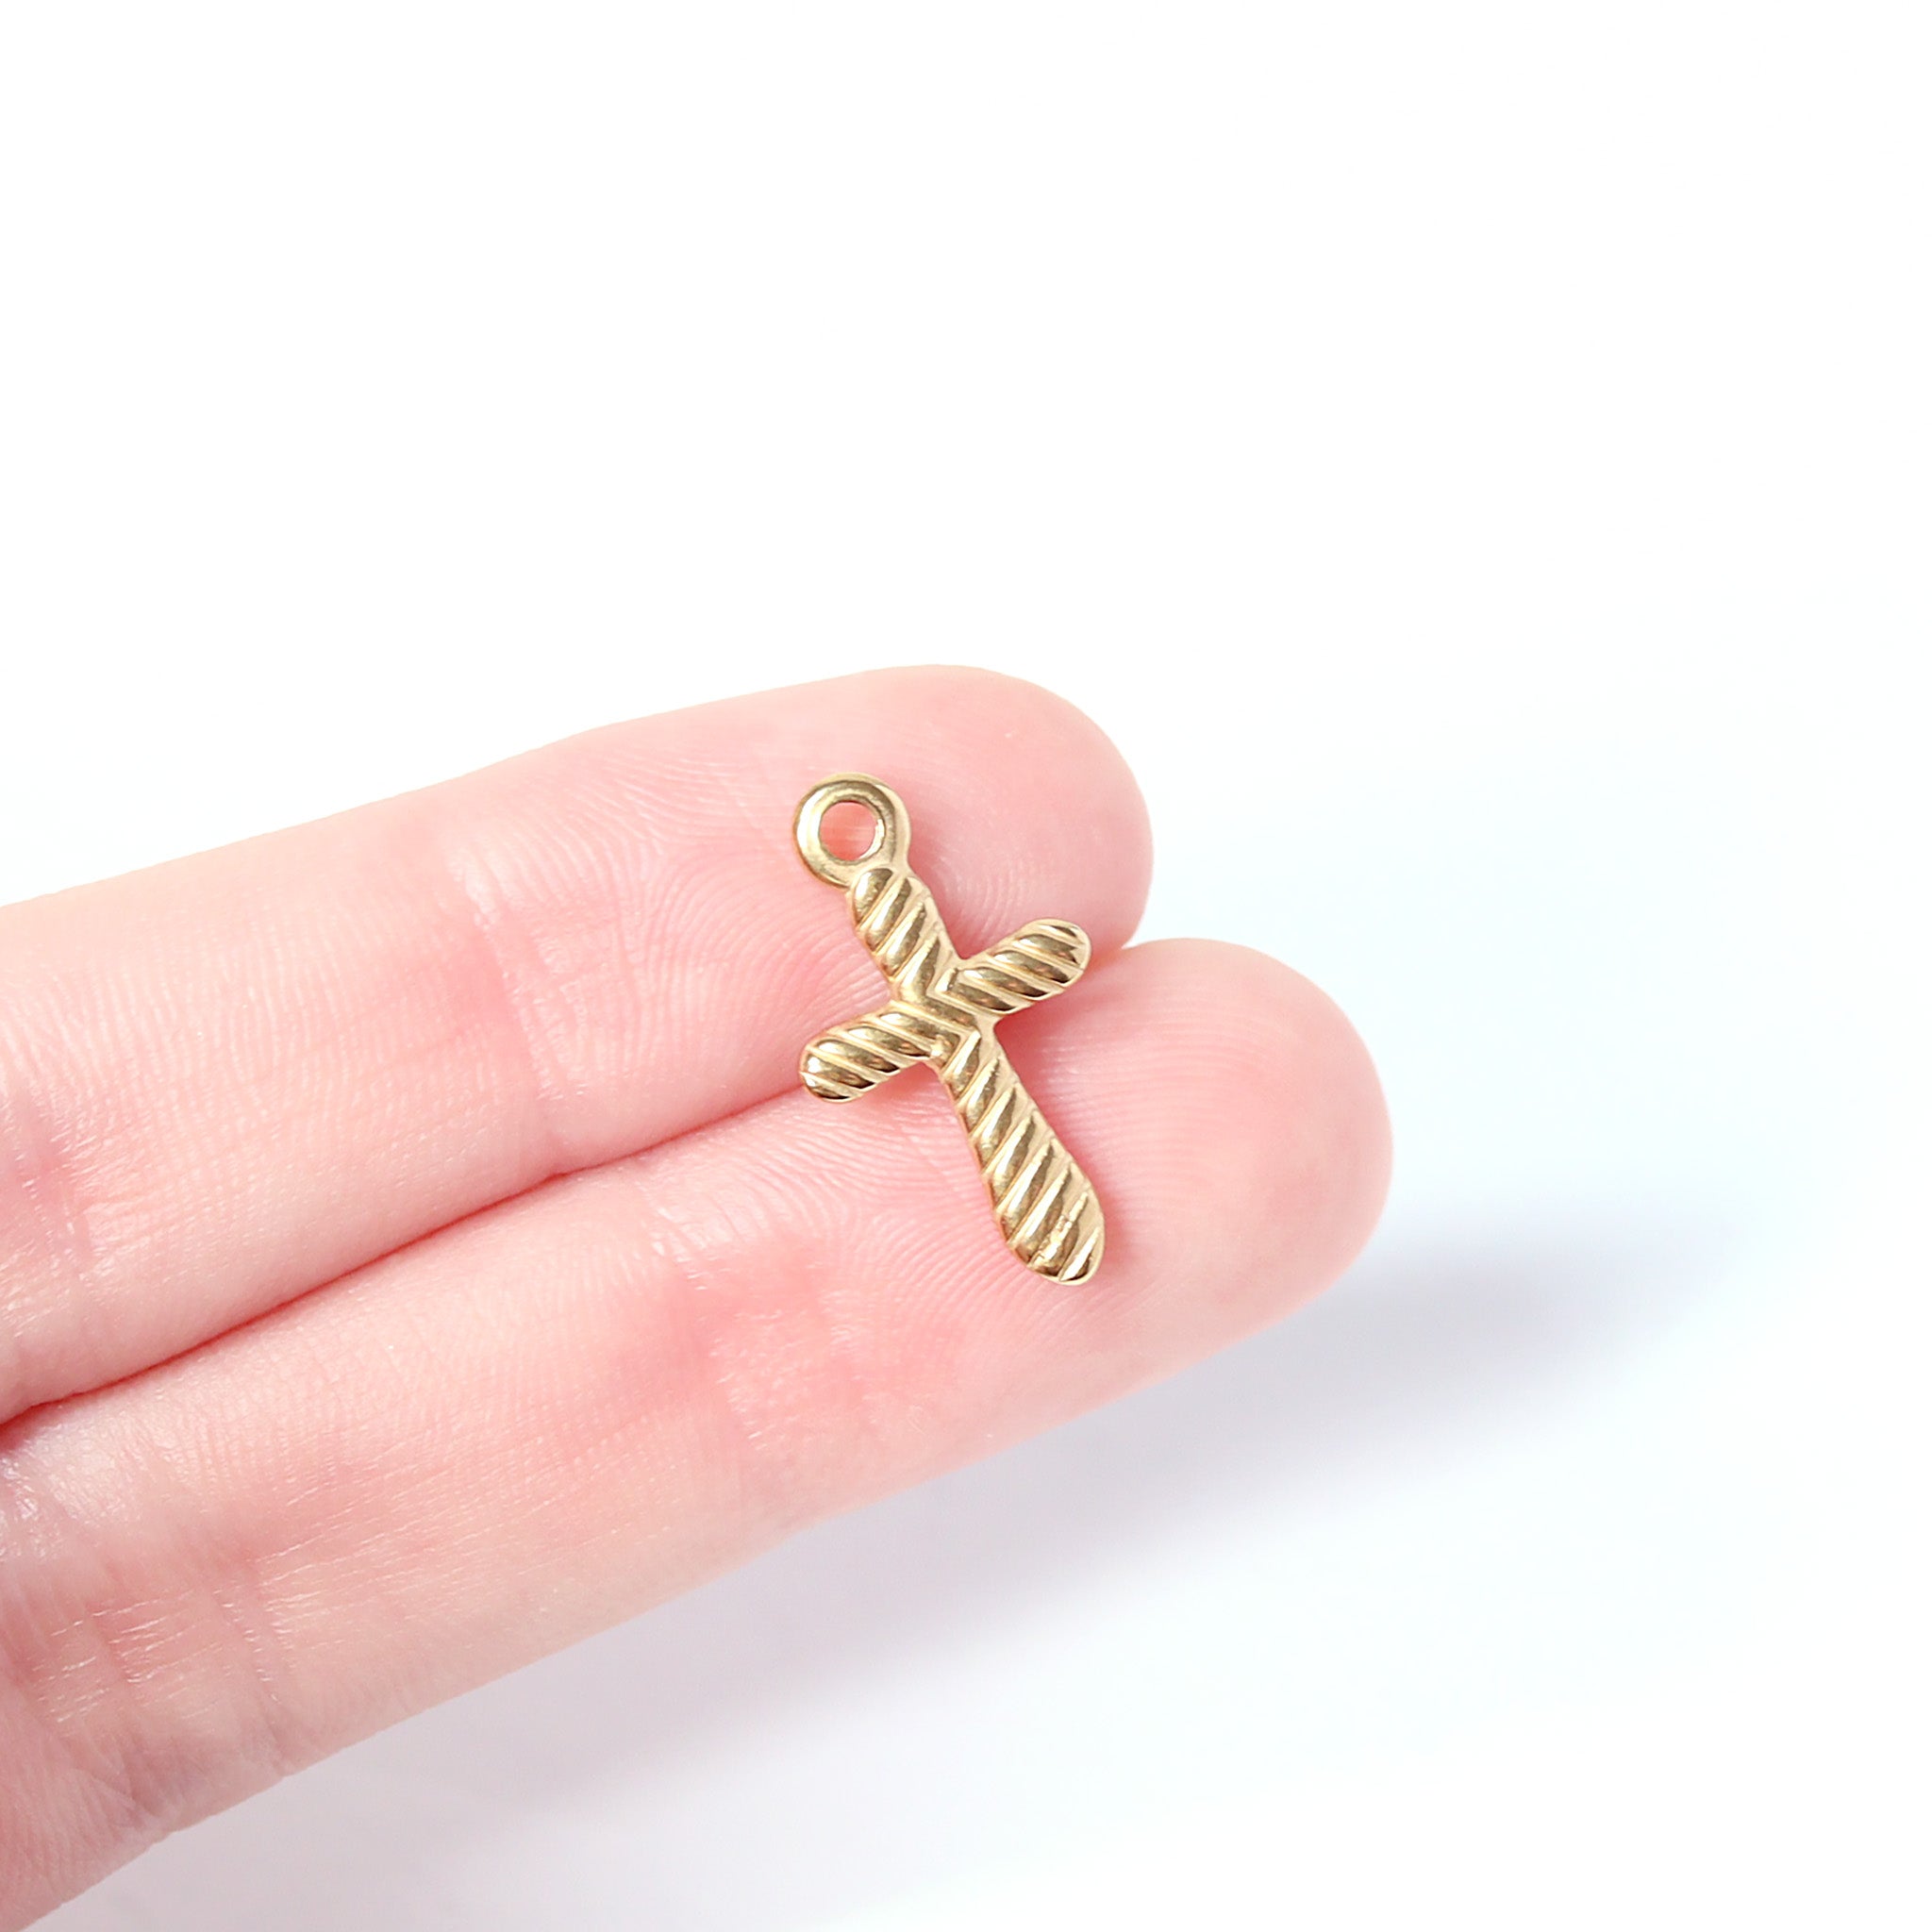 18K Gold PVD Stainless Steel Textured Cross Charm / PDL0114